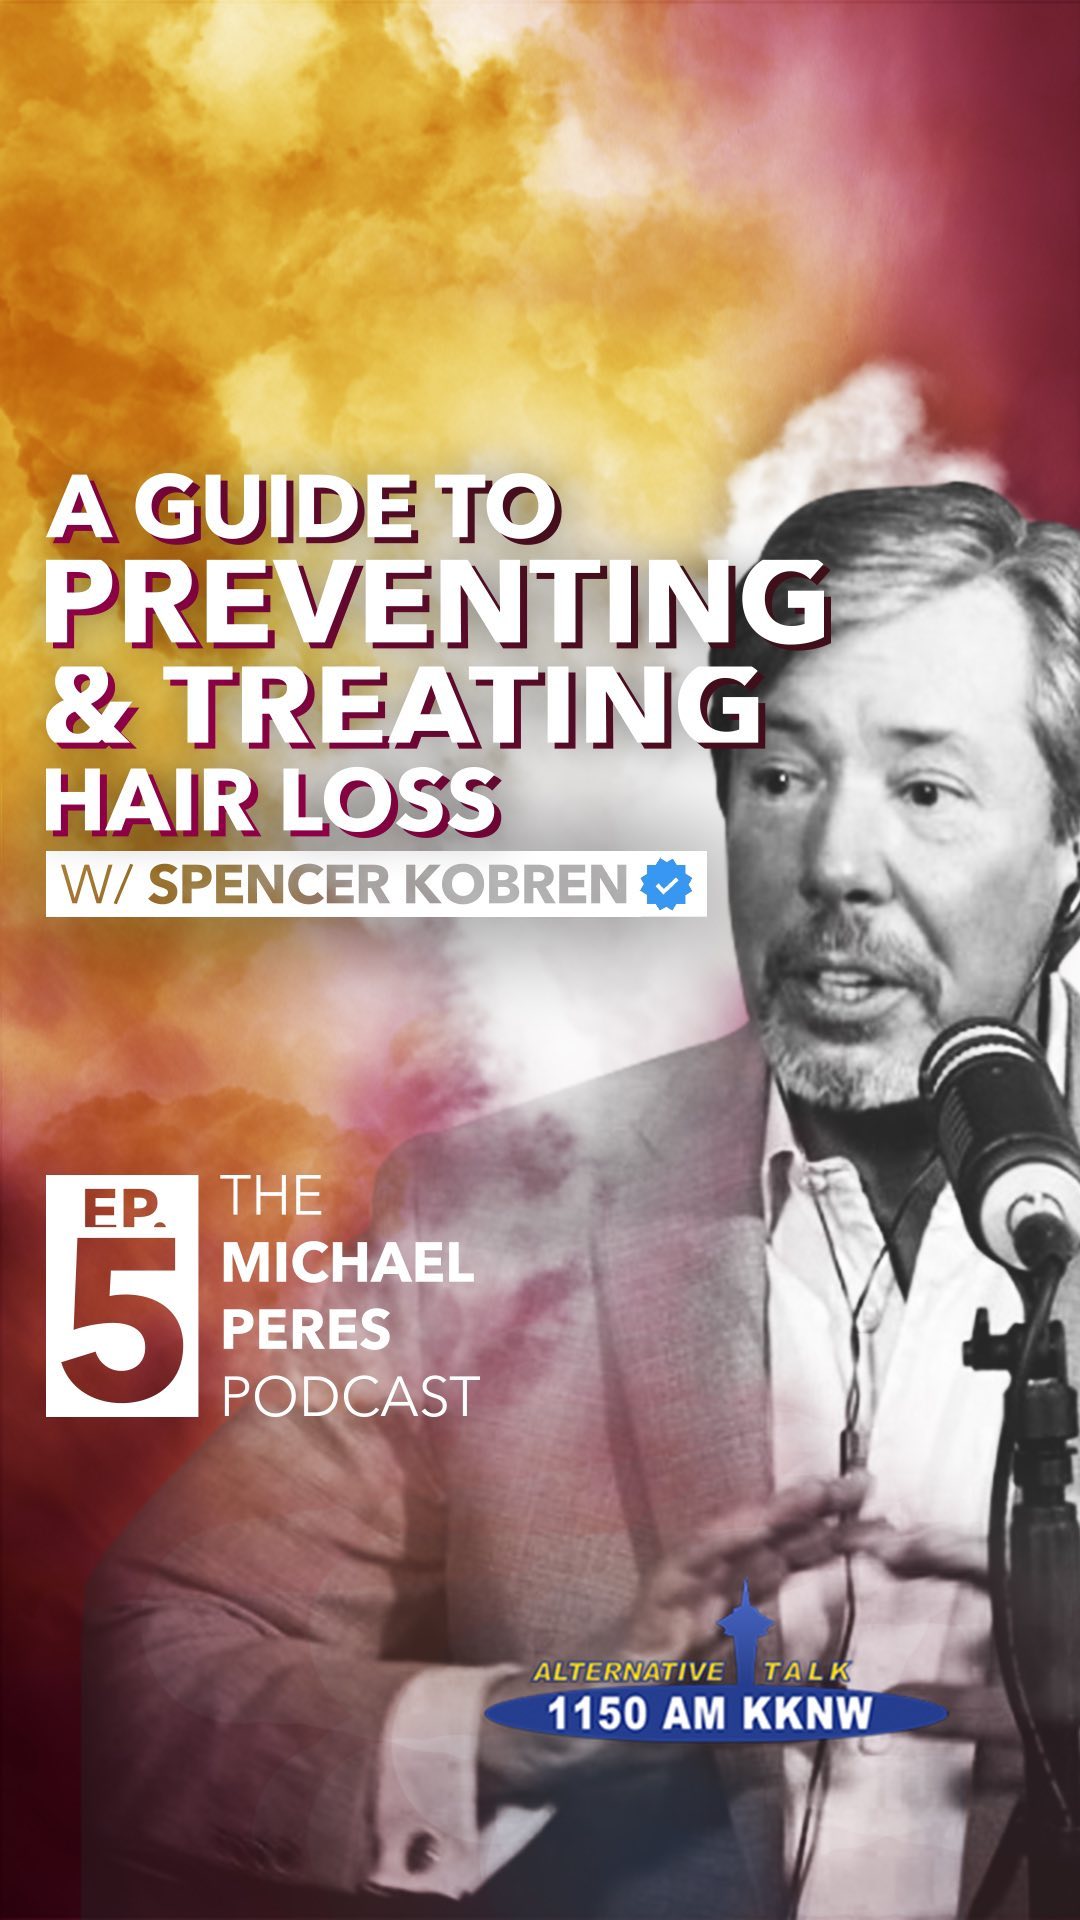 Michael peres podcast: a guide to preventing & treating hair loss w/ spencer kobren